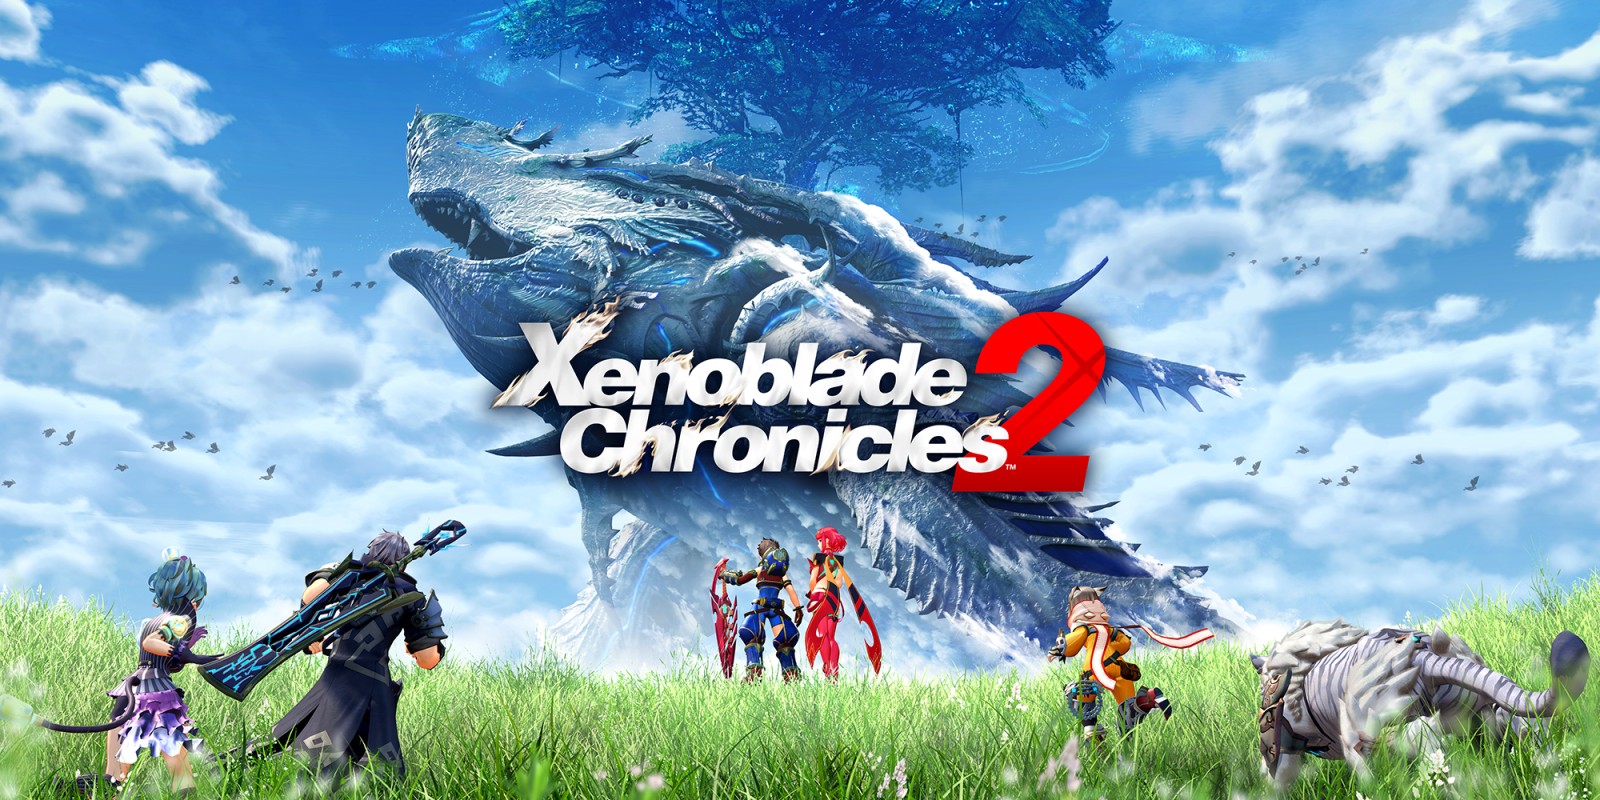 H2x1_NSwitch_XenobladeChronicles2_image1